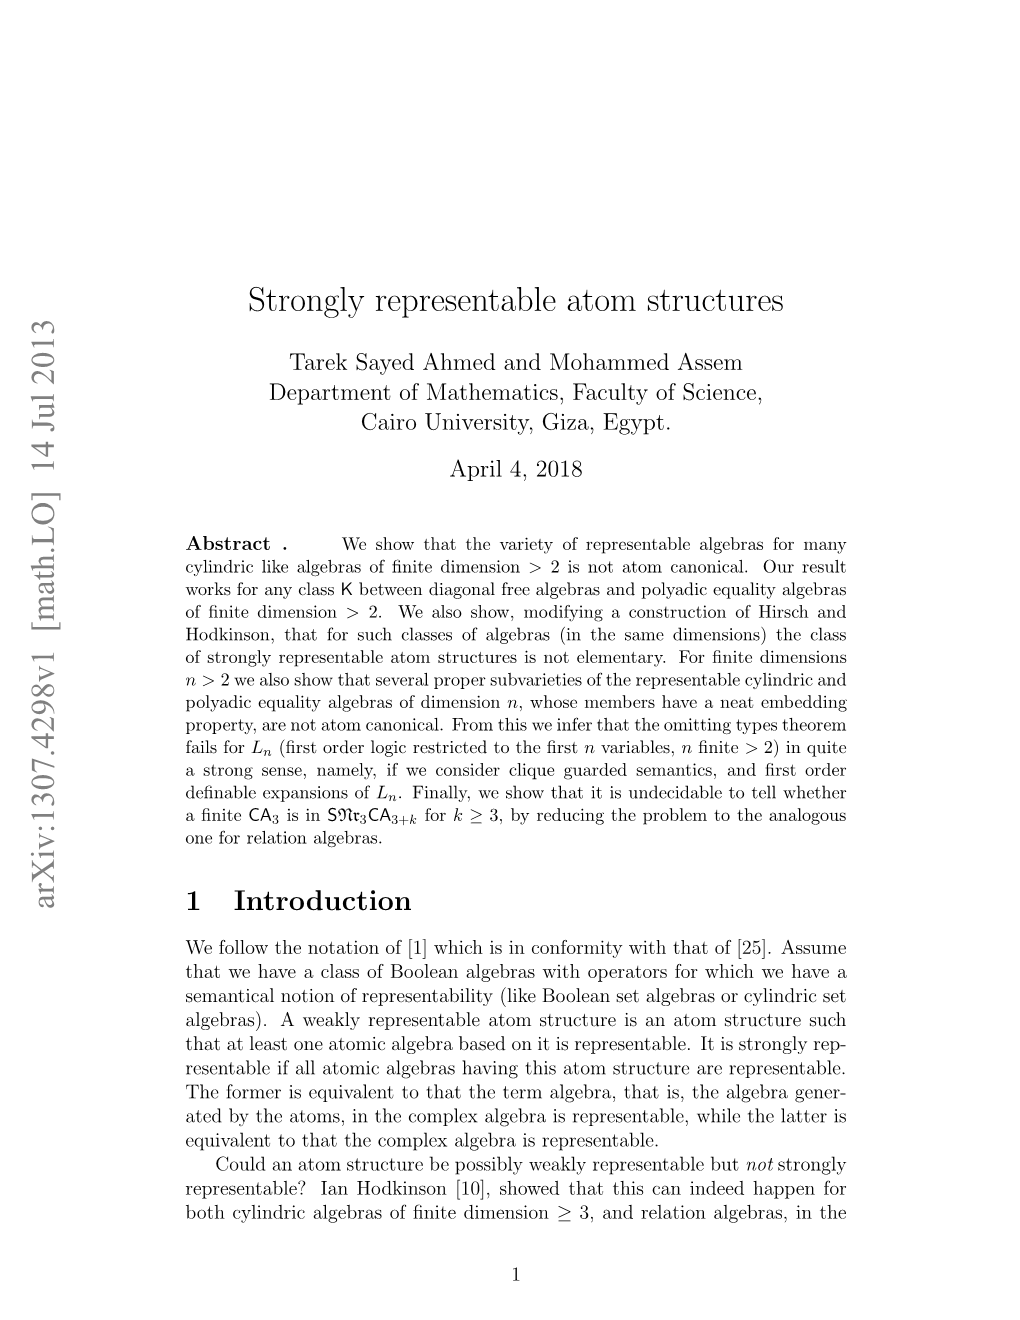 Strongly Representable Atom Structures and Neat Embeddings